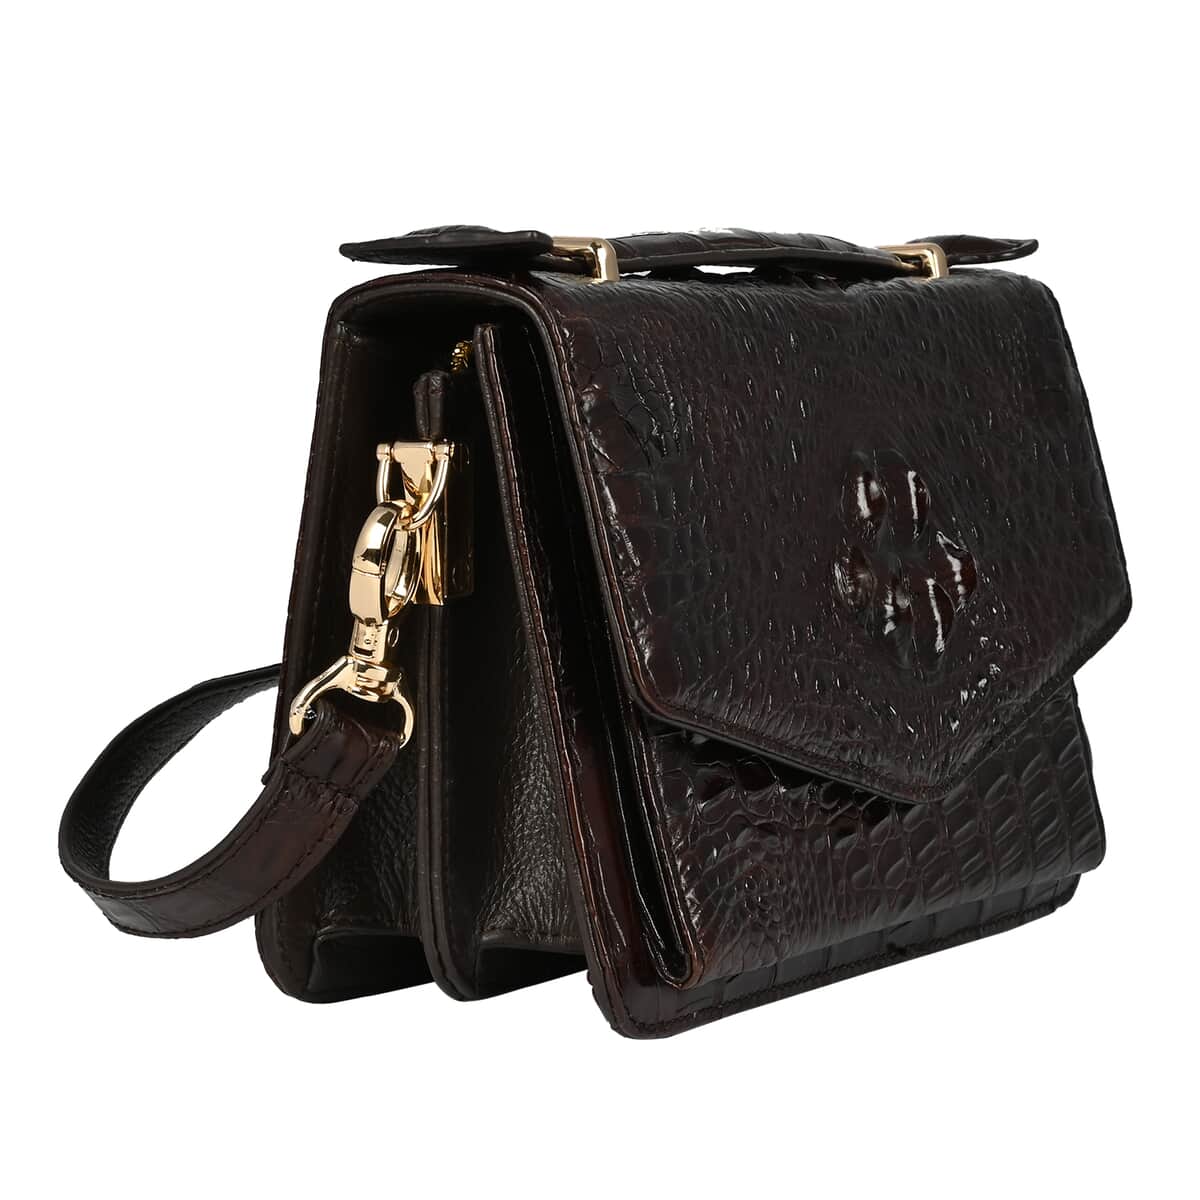 THE PELLE Dark Chocolate Genuine Crocodile Leather Shell Along with Cow Leather Lining Crossbody Bag (8.66"x3.2"x5.5") with Shoulder Strap image number 4